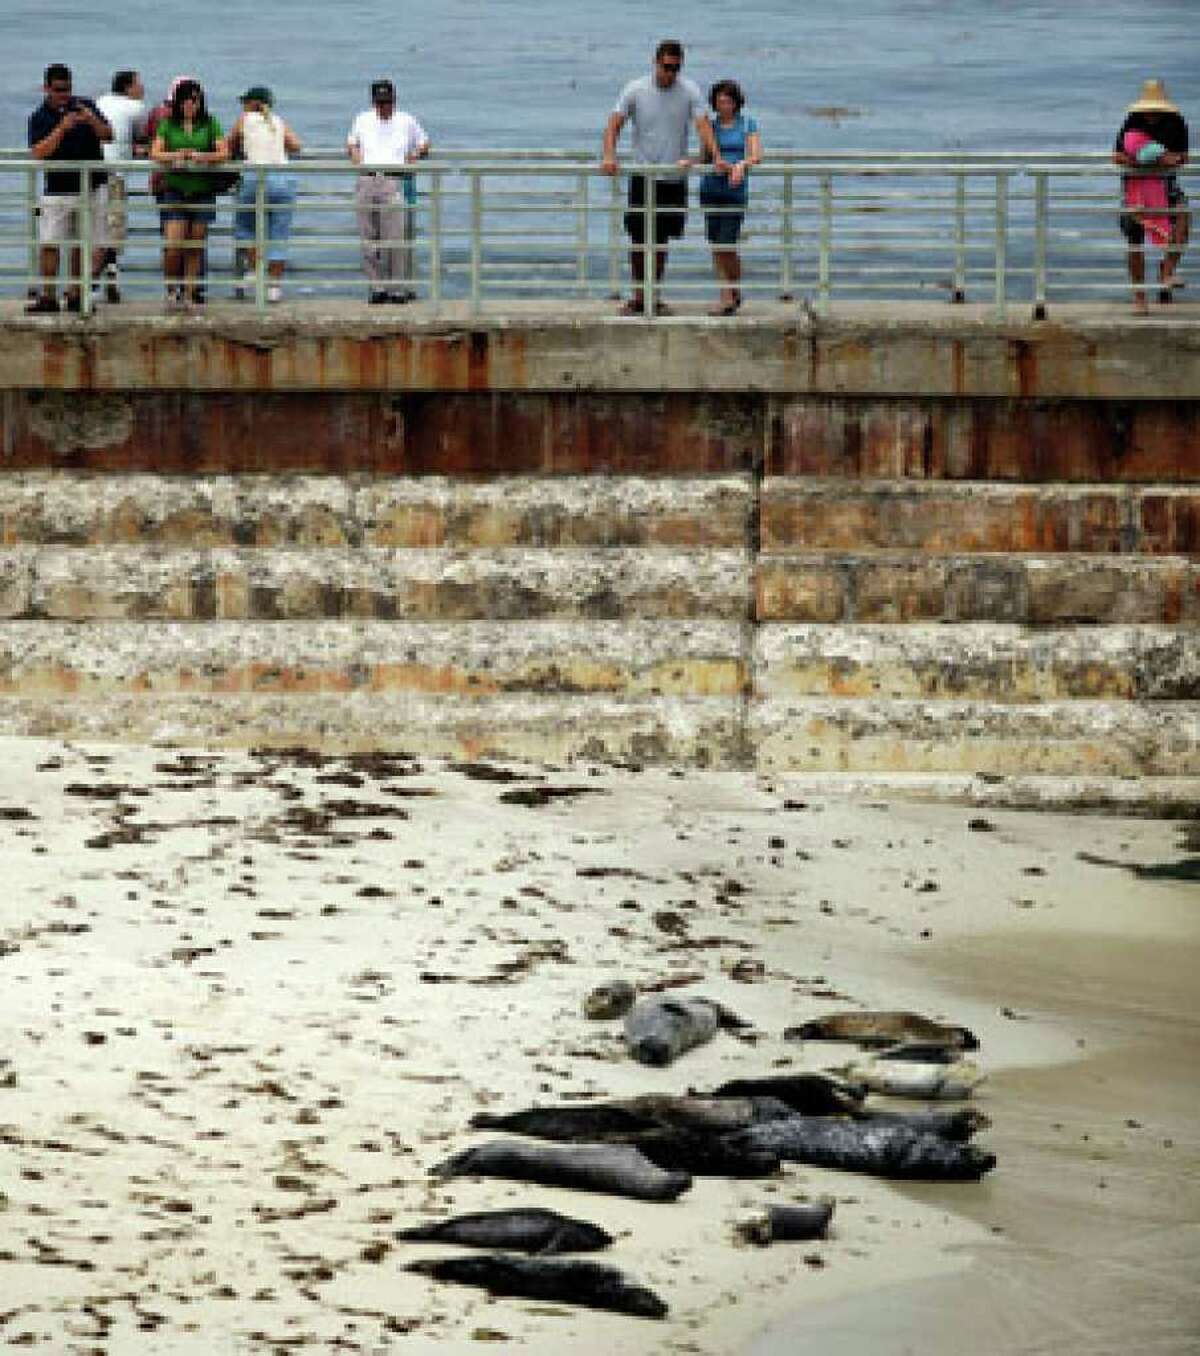 Vacationers and locals gather to watch harbor seals lounge on the beach where they have gathered for years in the La Jolla section of San Diego this summer.